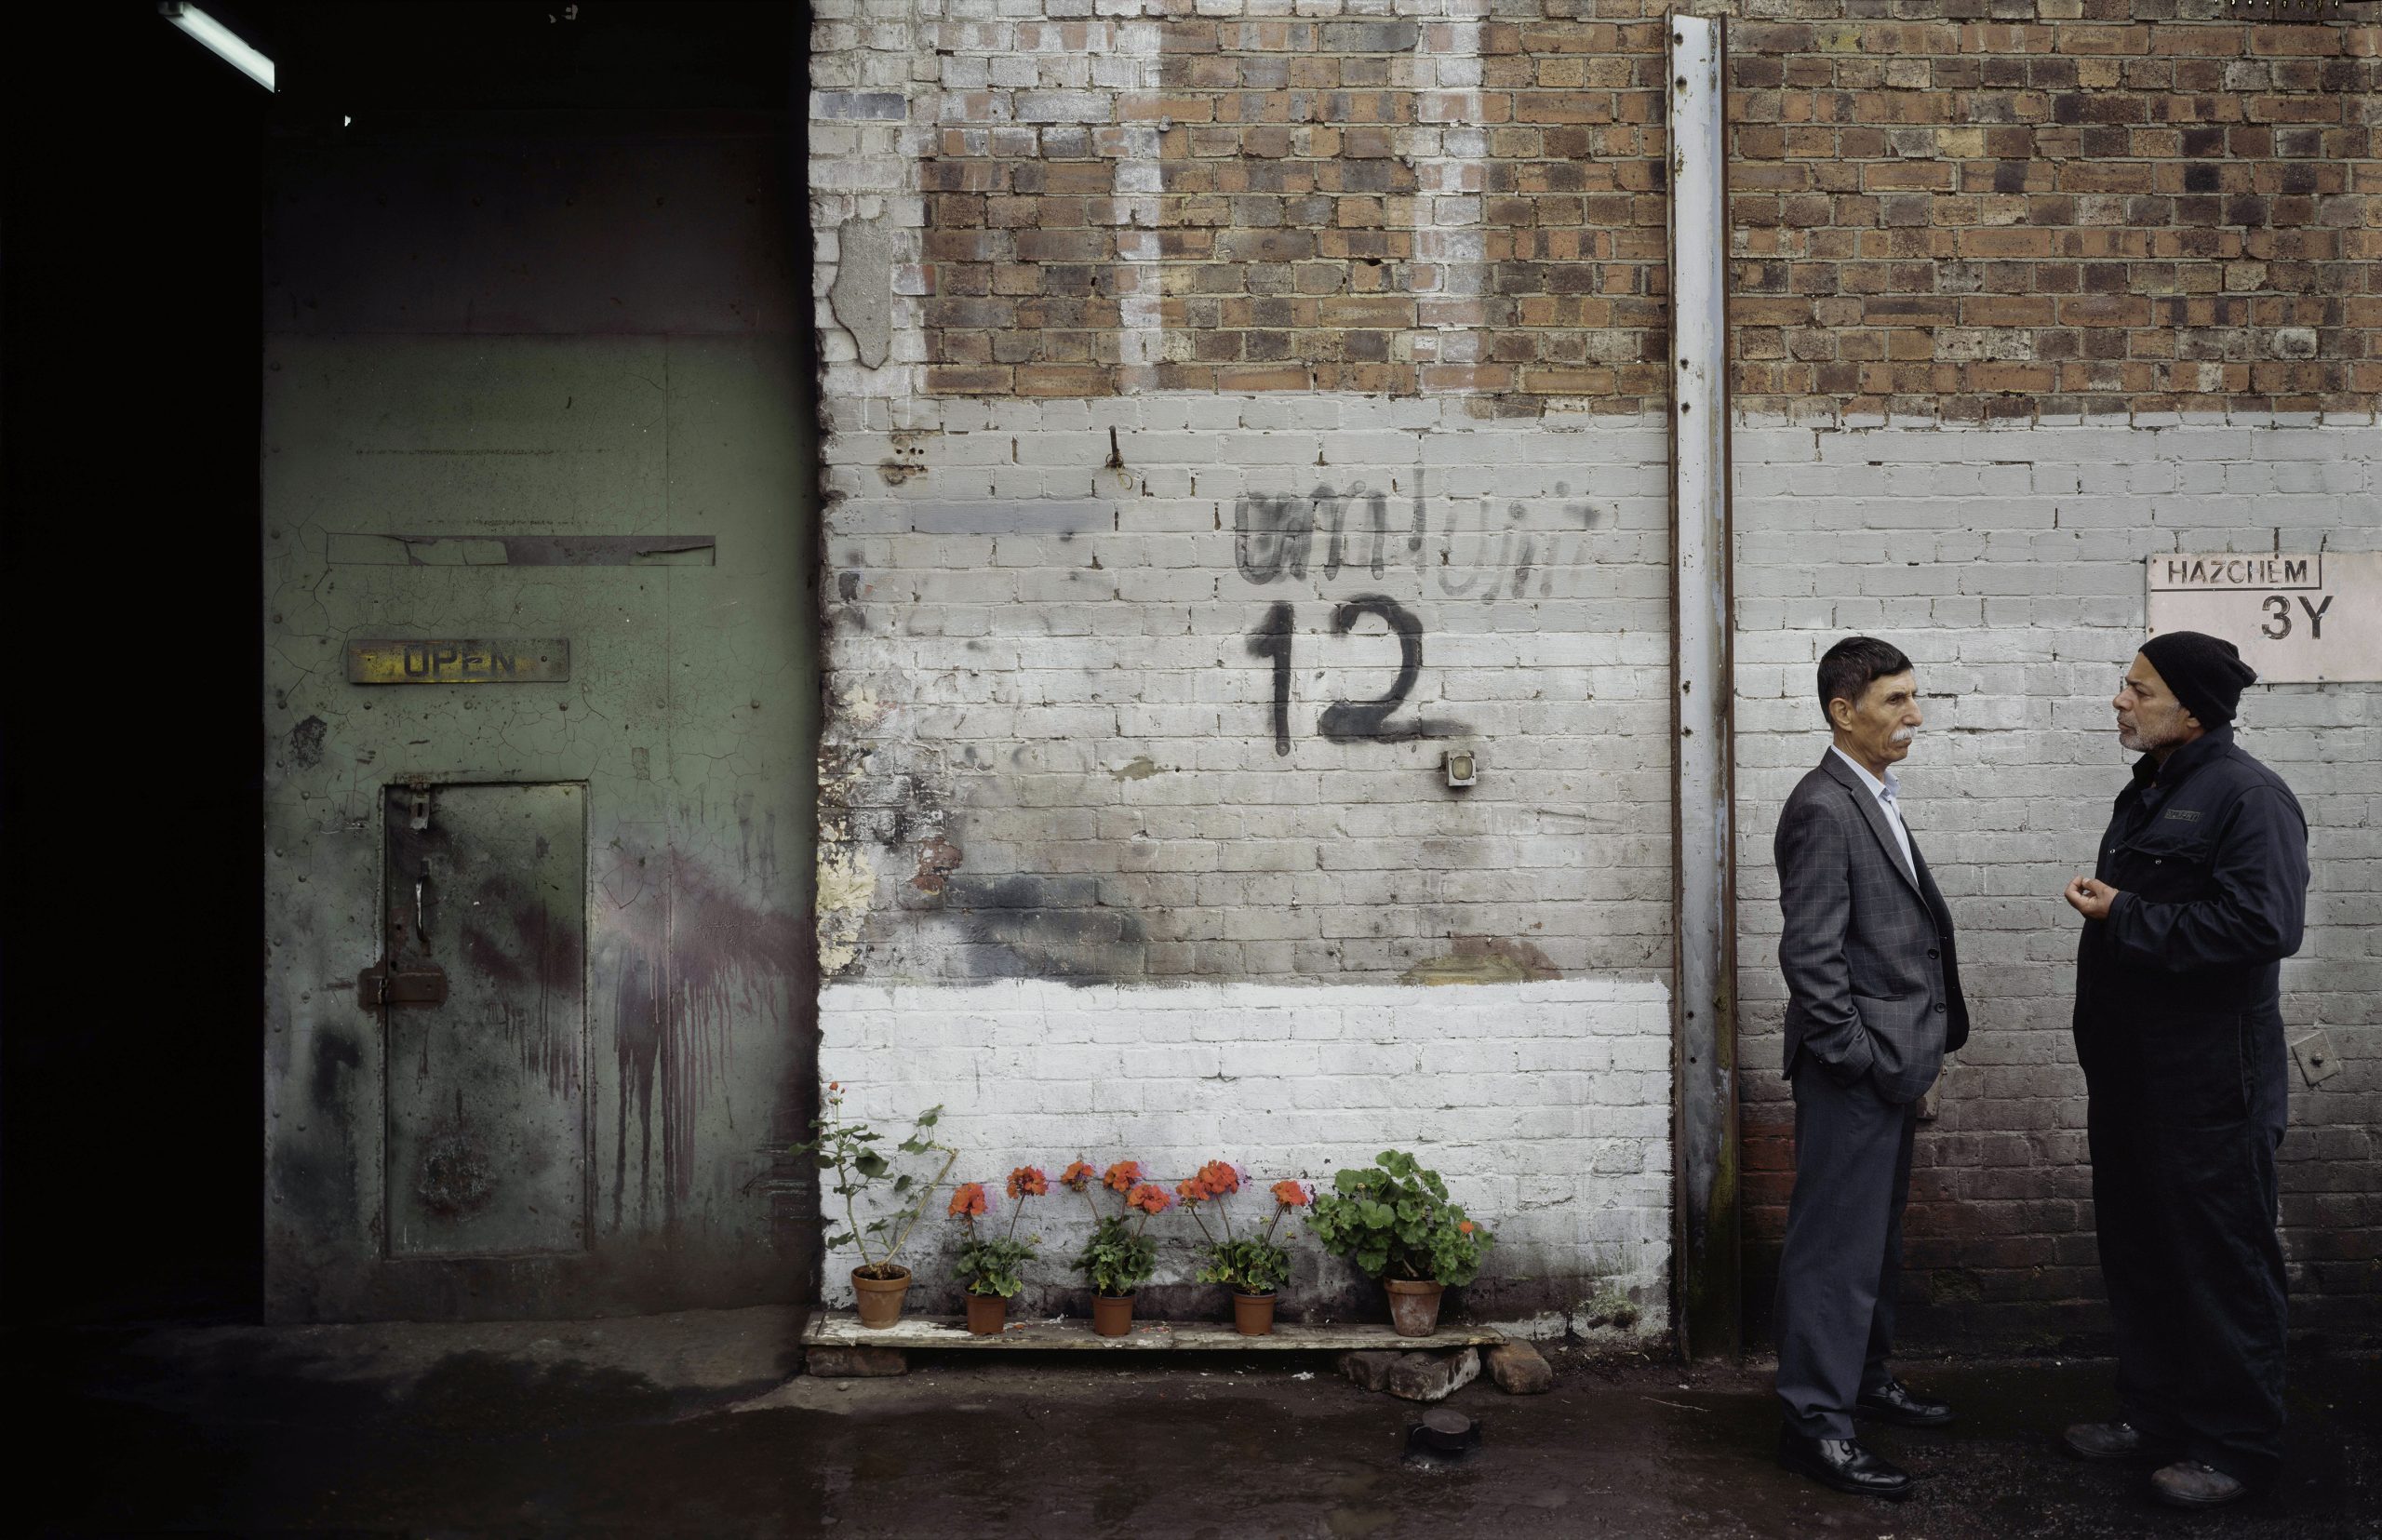 Photograph by artist, Mitra Tabrizian. In a backstreet, two men are facing each other and having a conversation.